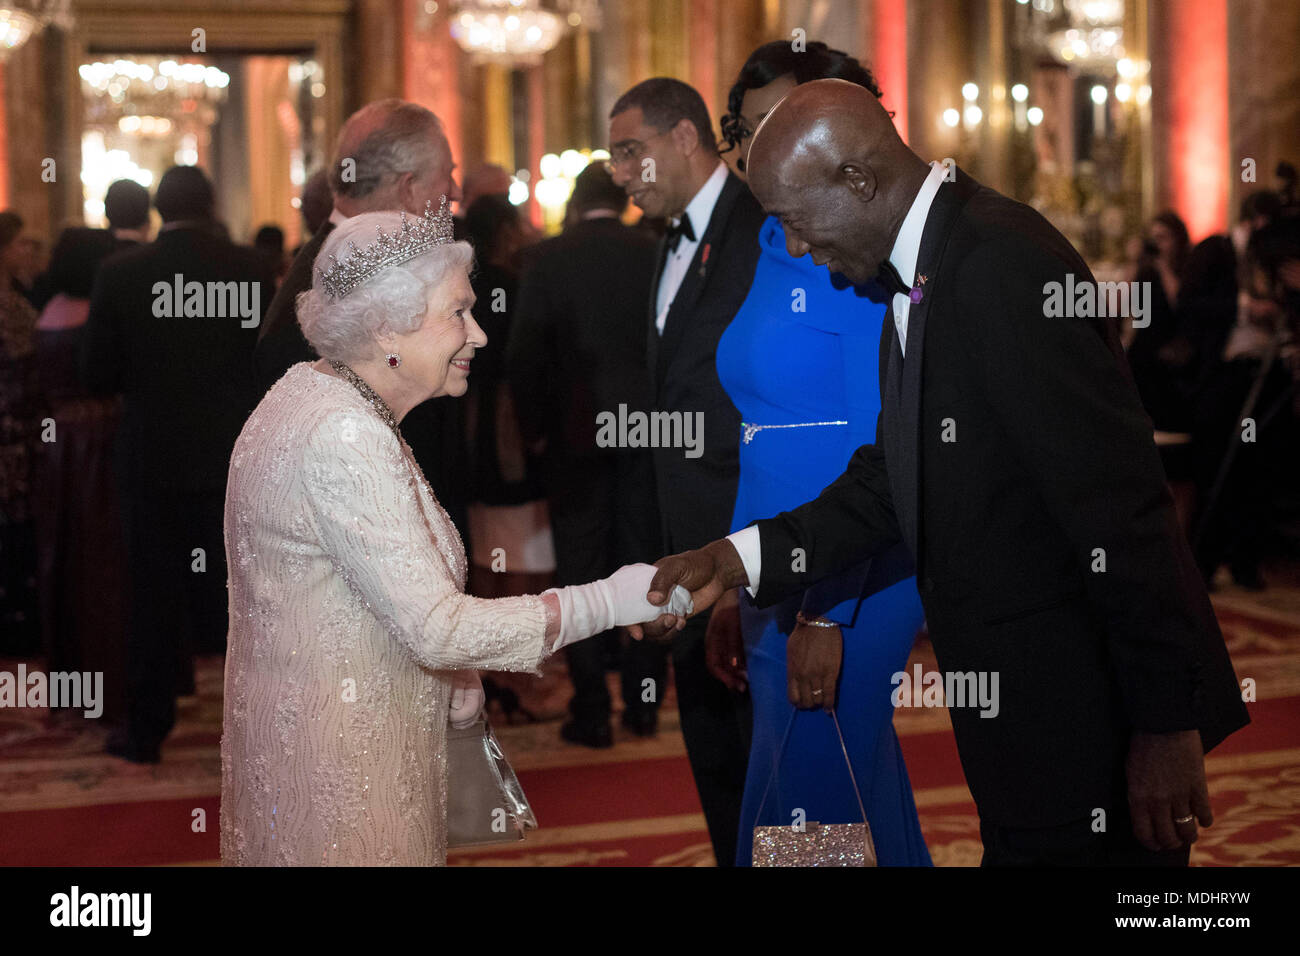 Queen Elizabeth II greets Keith Rowley, Prime Minister of Trindad and Tobago, in the Blue Drawing Room at Buckingham Palace in London as she hosts a dinner during the Commonwealth Heads of Government Meeting. Stock Photo